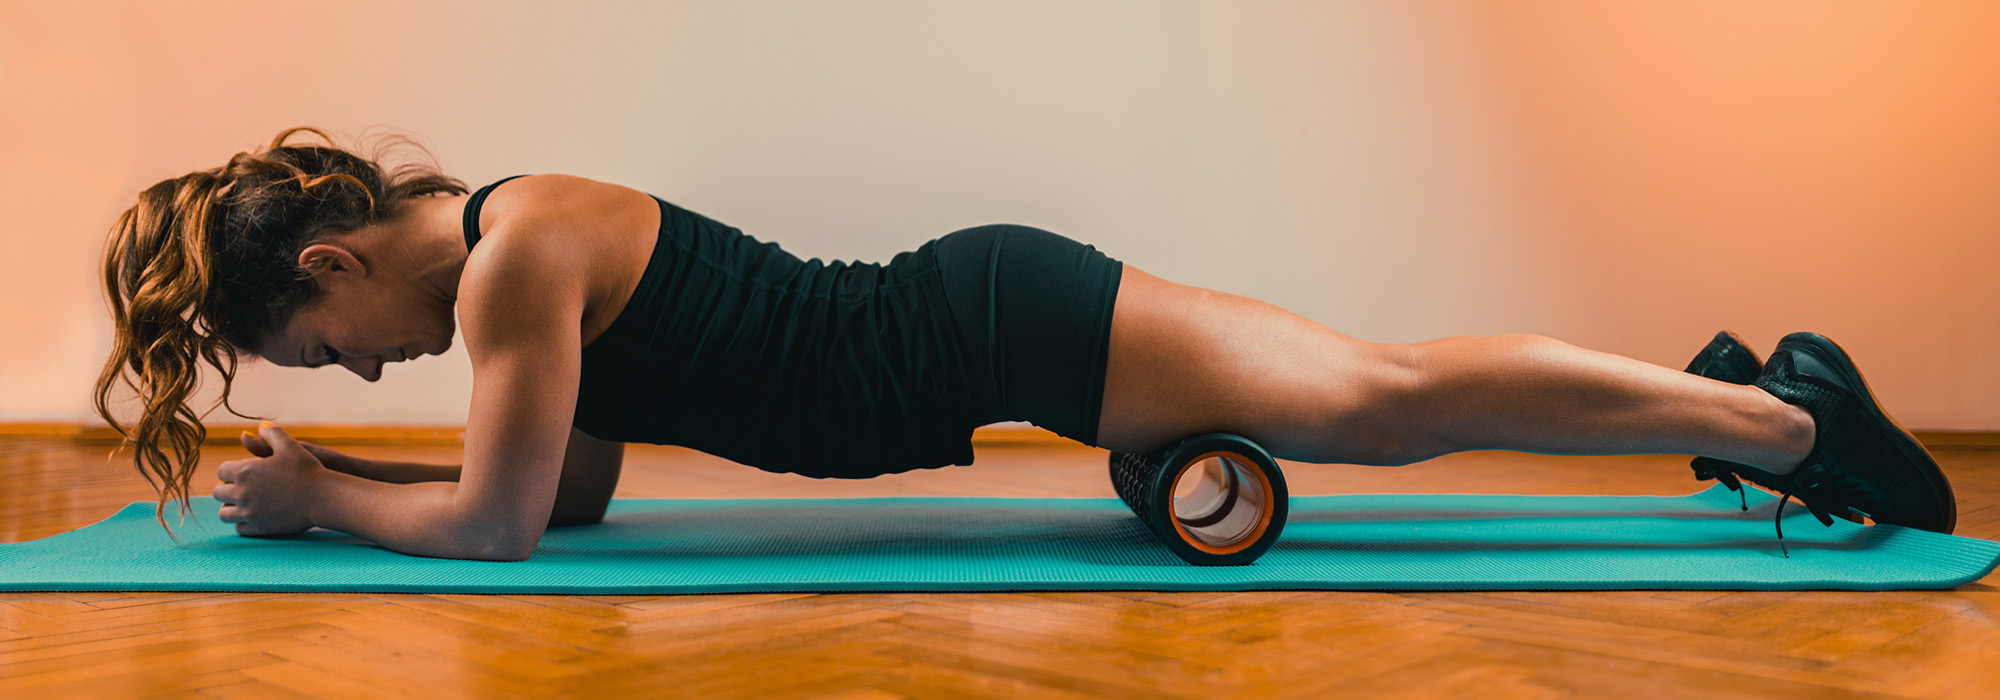 Top 5 Foam Rollers According to a Physical Therapist